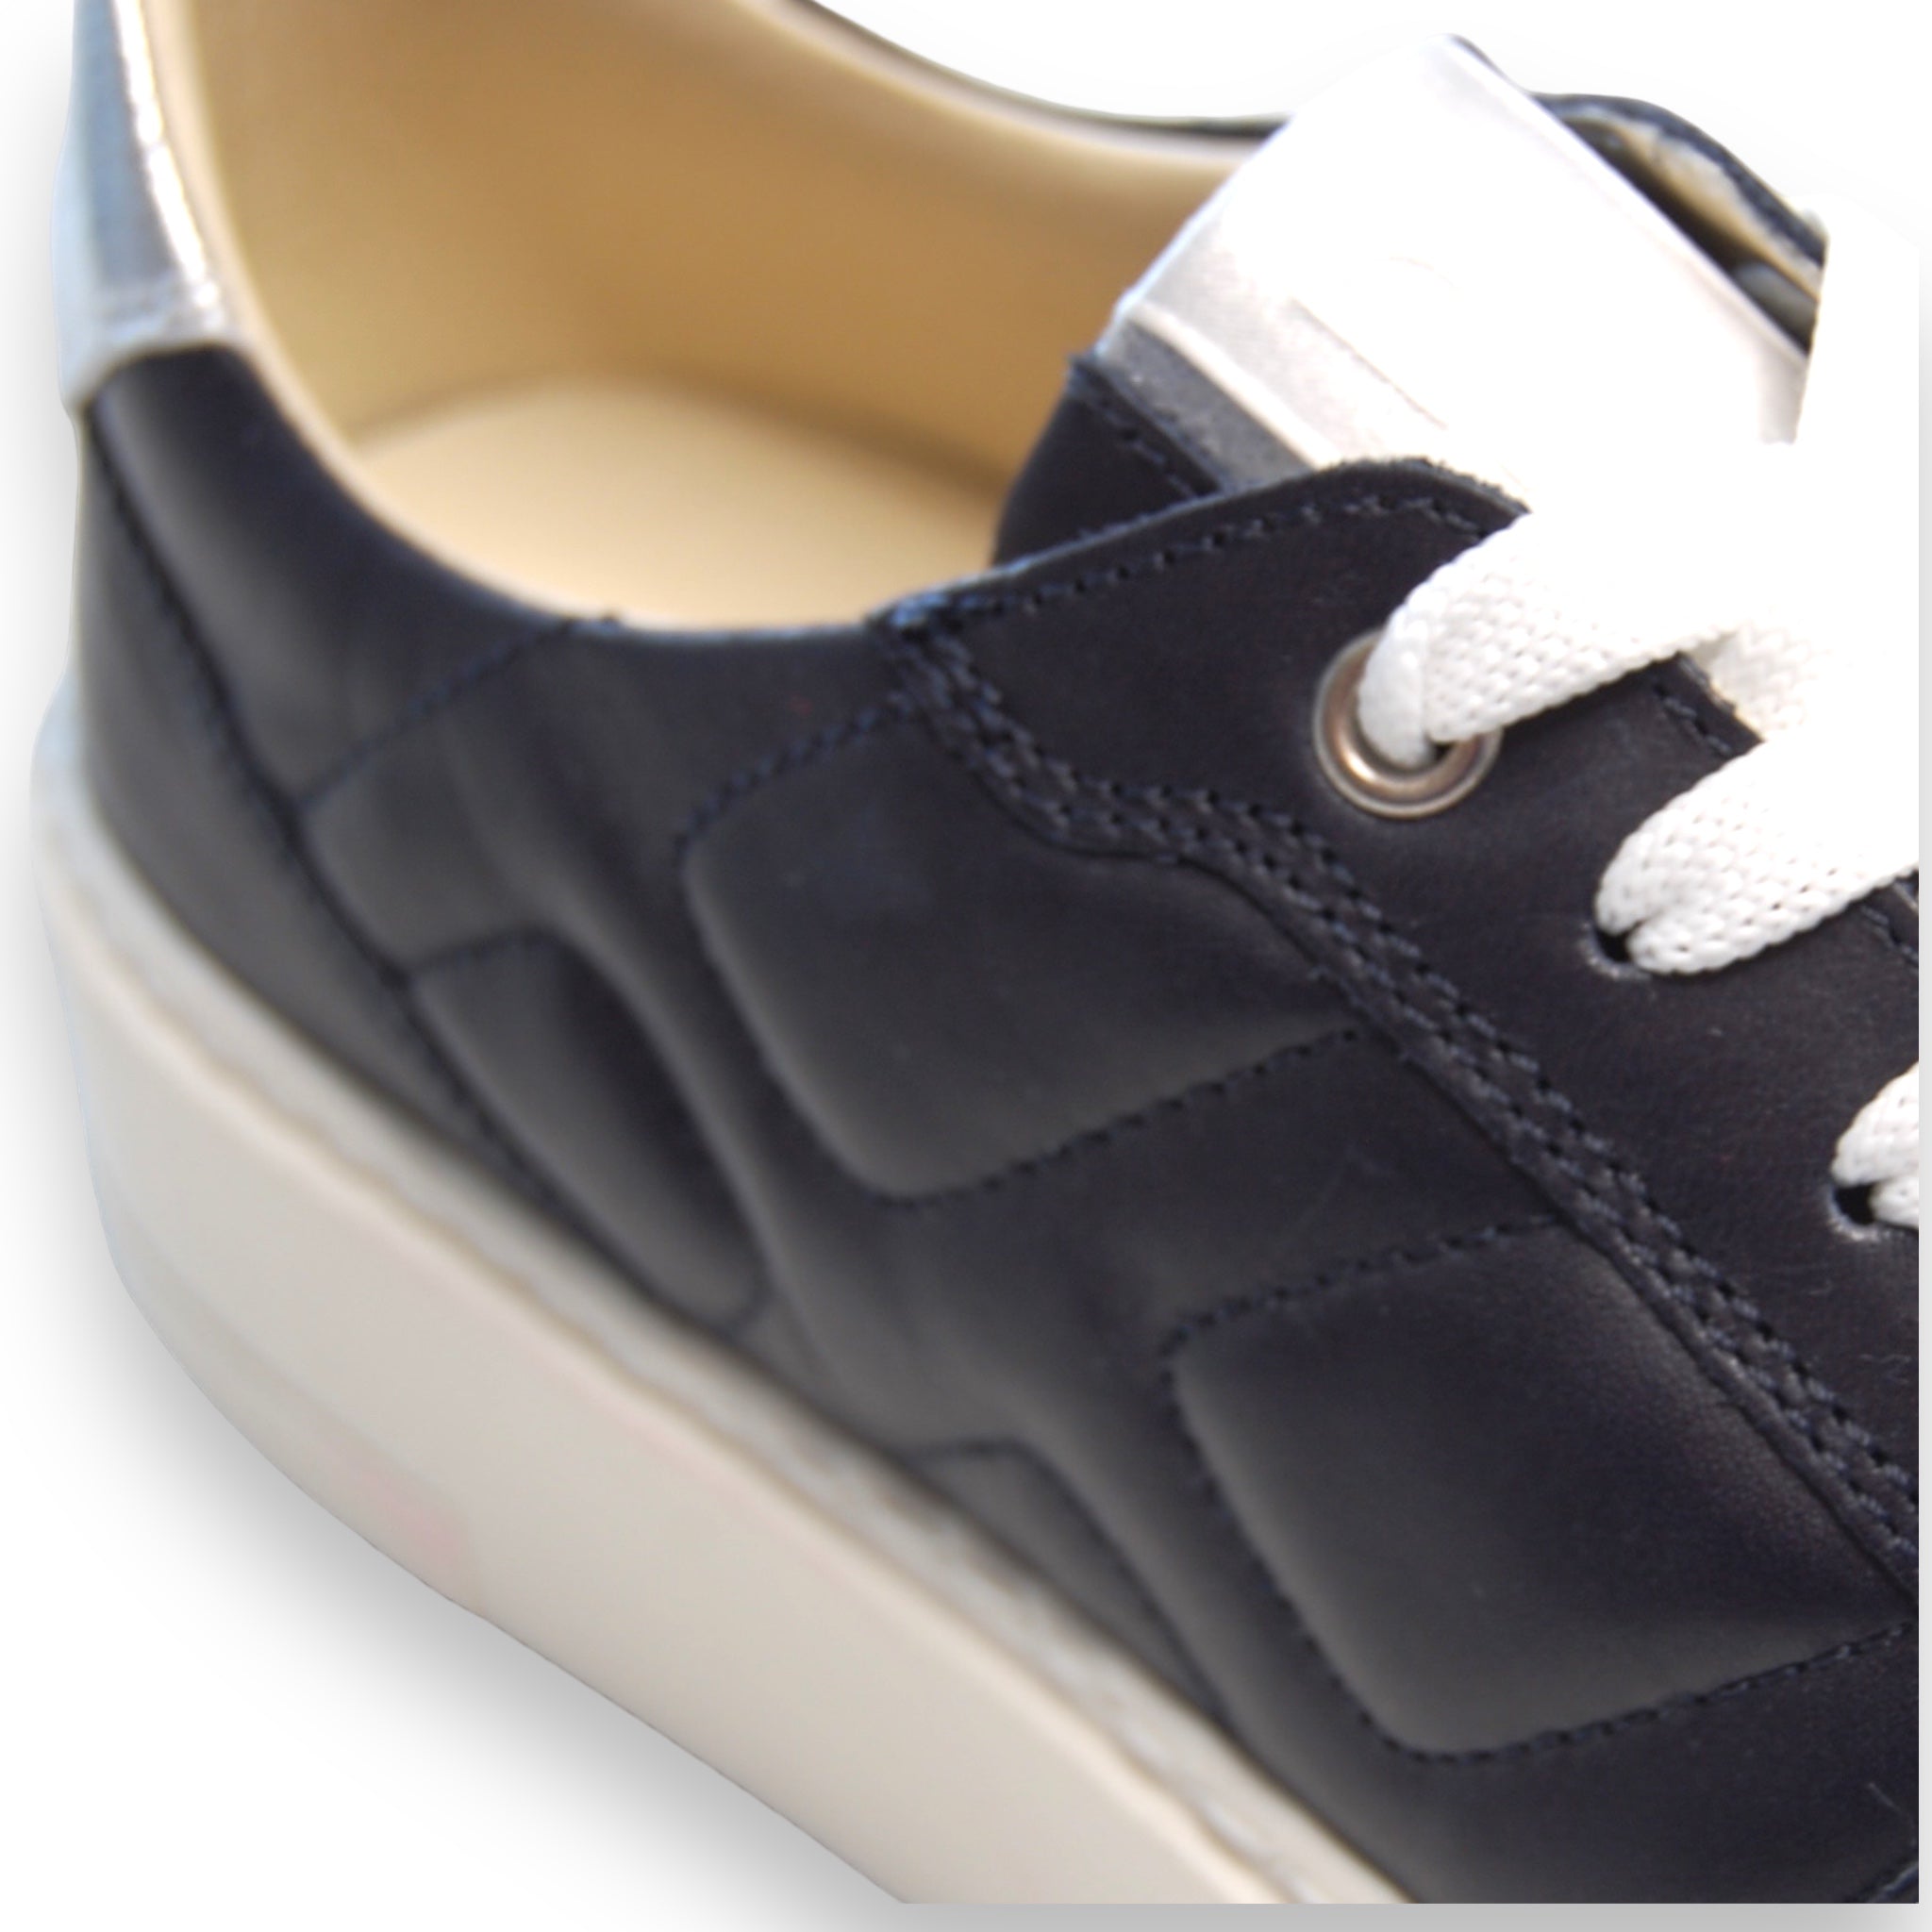 DL Sport Quilted Leather Sneaker Navy style 5608-detail